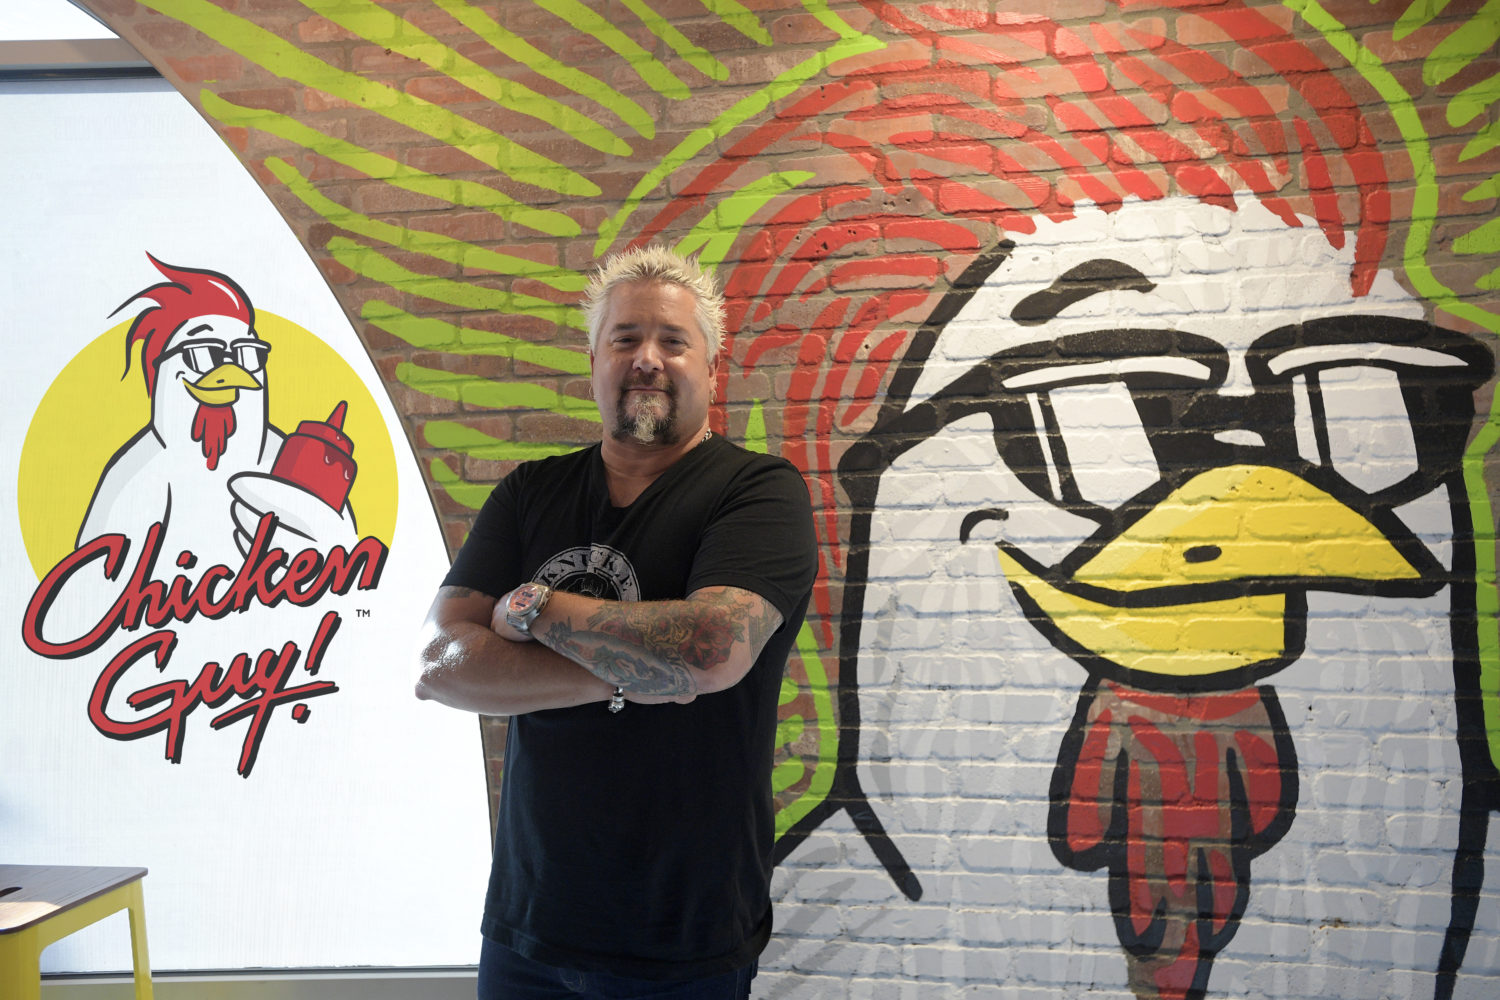 Lake Buena Vista, Fla. (August 30, 2018) - Chef Guy Fieri was at Chicken Guy! at Disney Springs today for a special ribbon-cutting ceremony. Hundreds of guests were lined up in anticipation of the ceremony and were rewarded for their enthusiasm with a tasty treat, as Fieri handed out samples of his chicken tenders and many of his 22 signature sauces to the hungry crowd. Thursday, Aug. 30, 2018, in Lake Buena Vista, Fla. (Phelan M. Ebenhack)